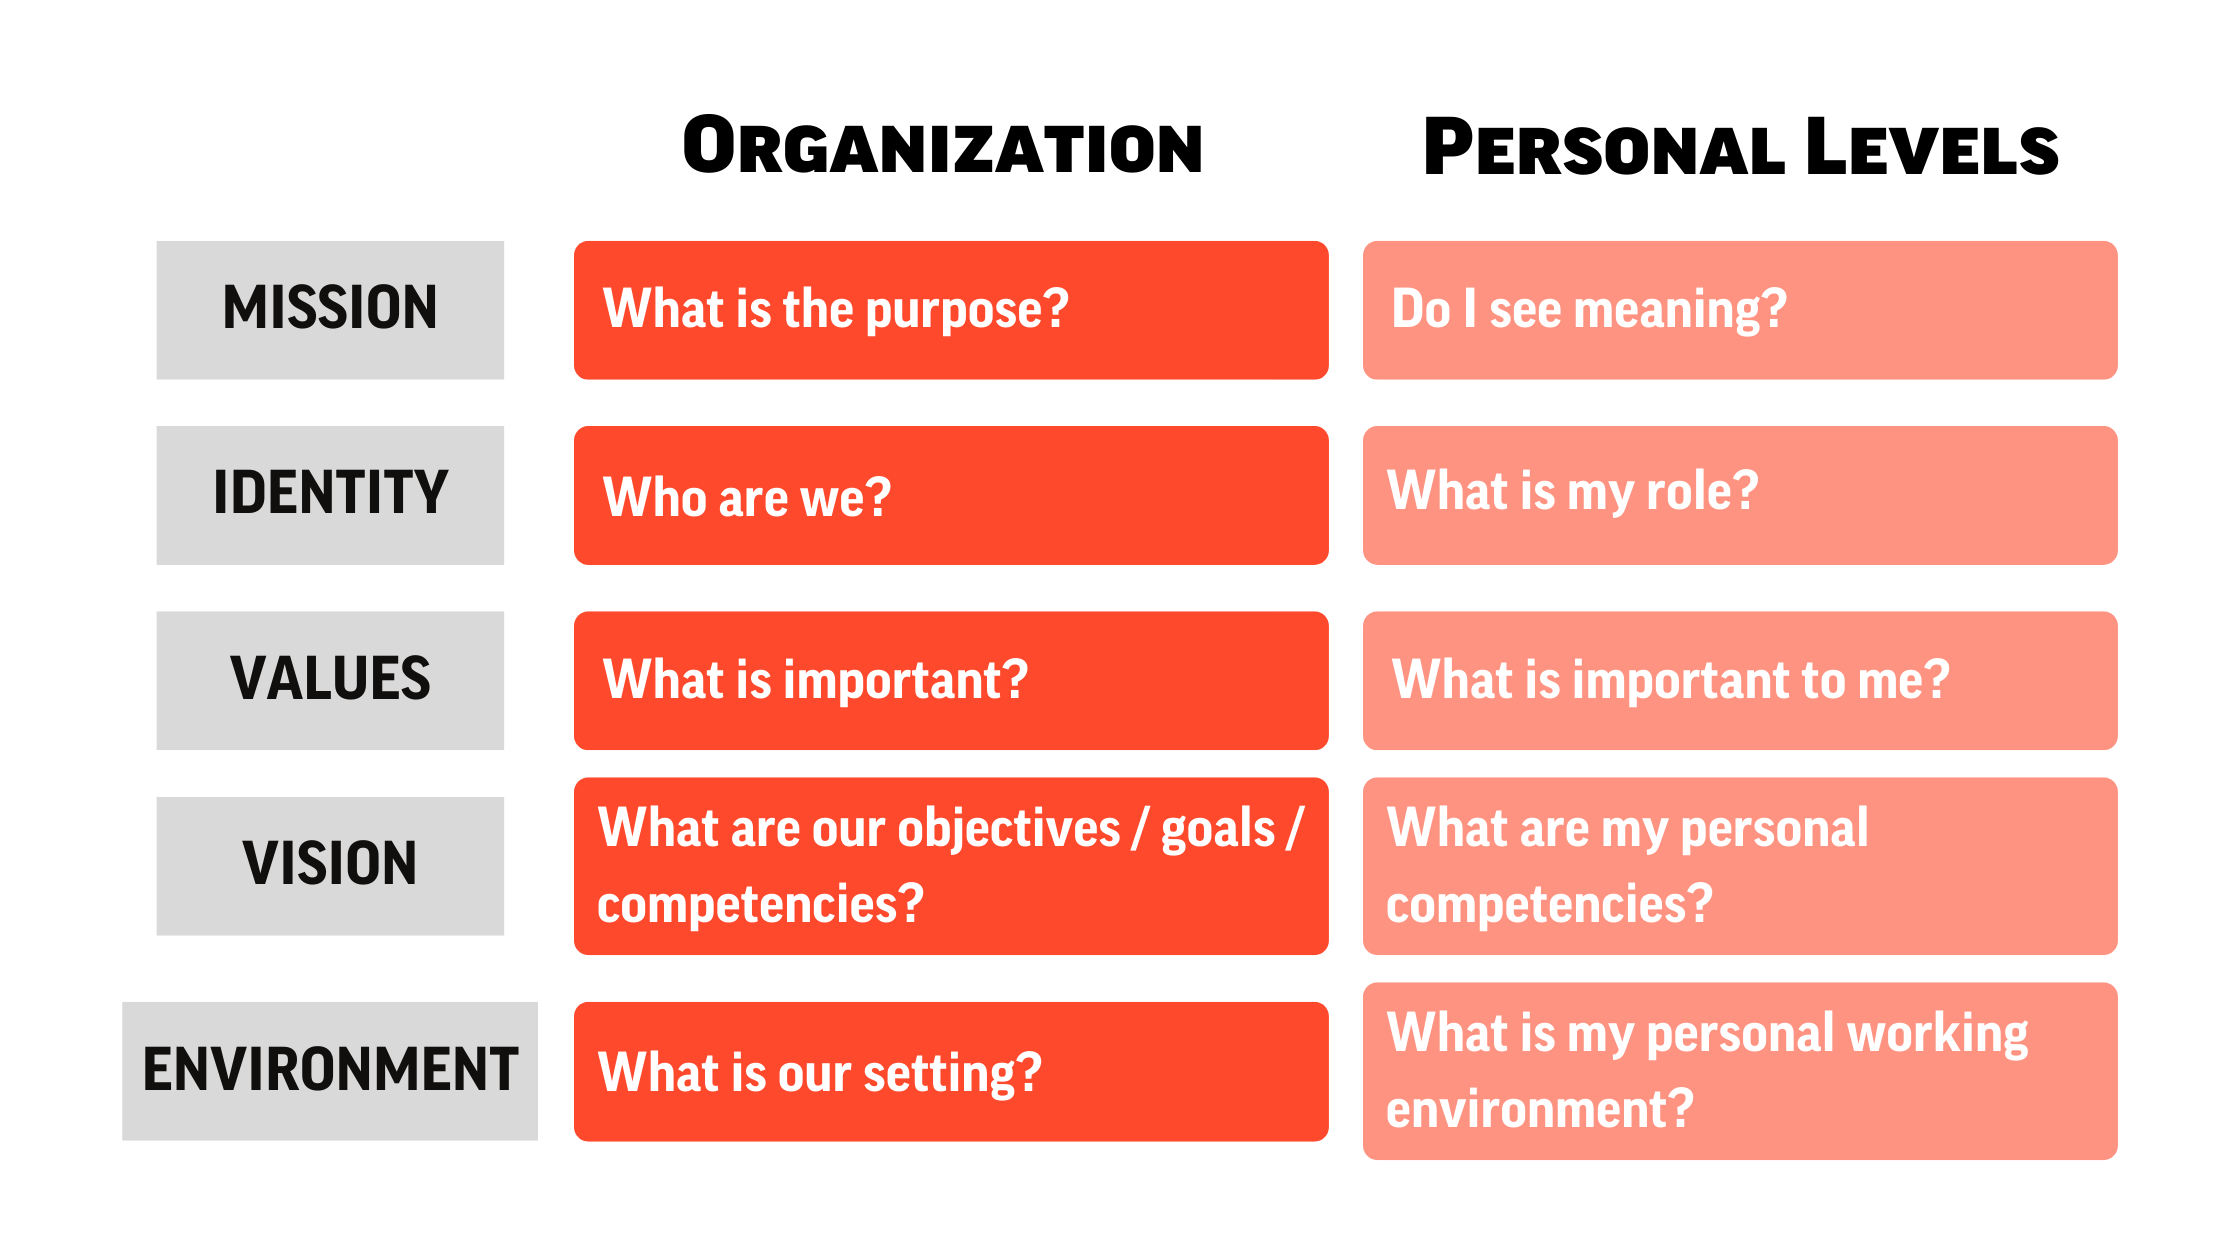 Organization and Personal Levels